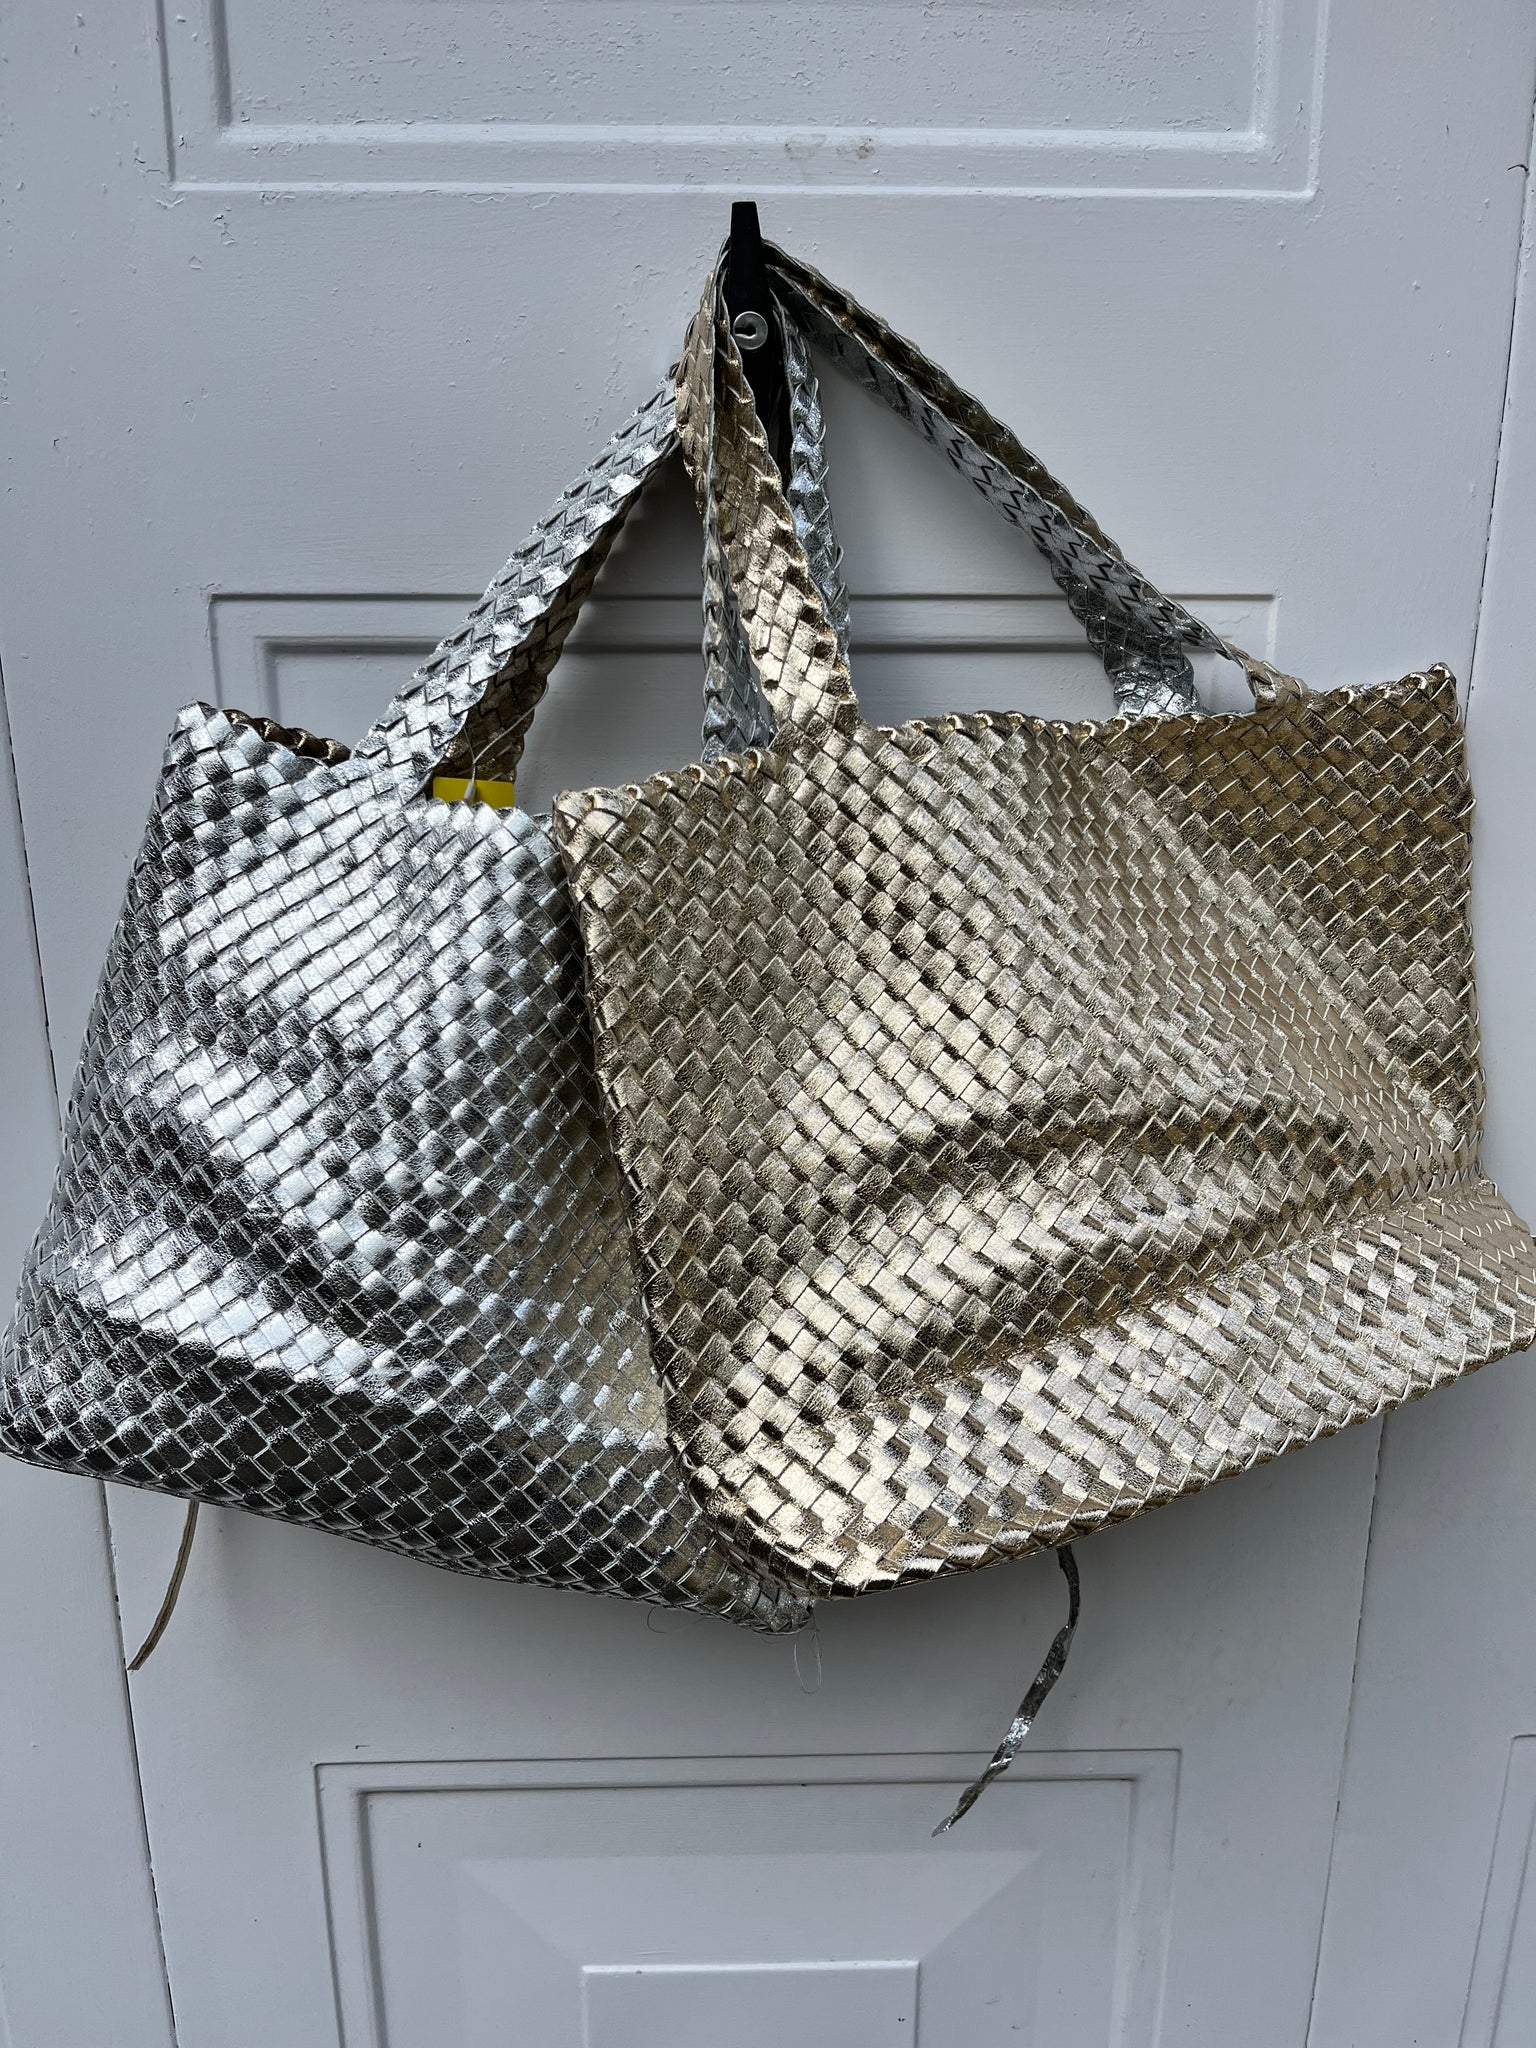 Vegan Leather 2 in 1 Reversible Woven  Tote - Gold / Silver